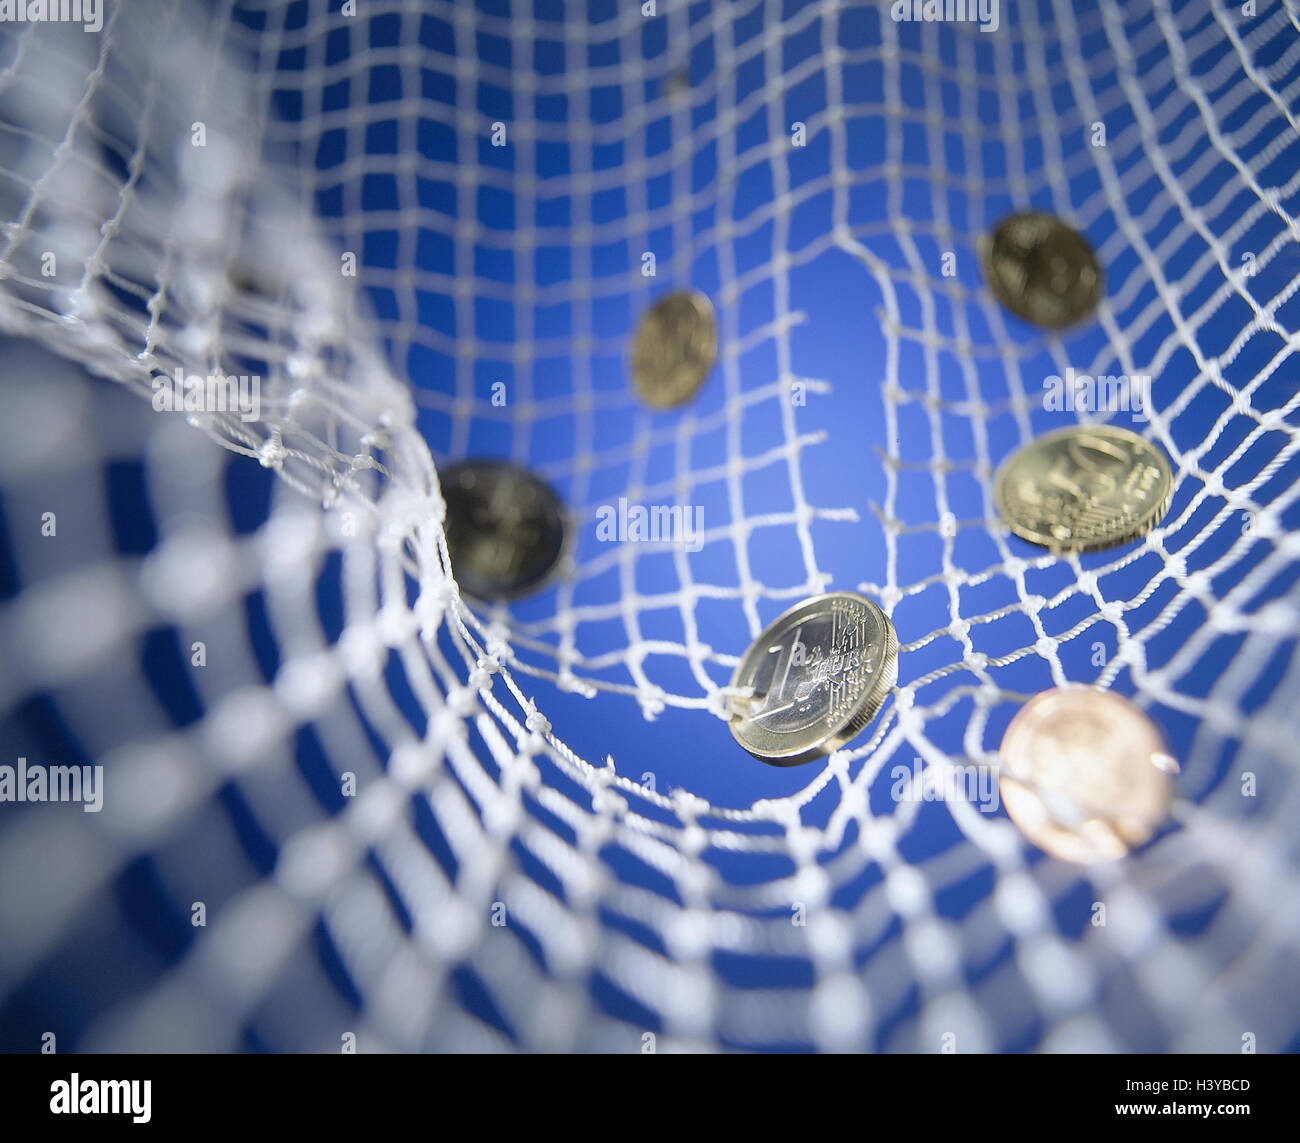 Network, holes, euro coins money, means payment, hard money, coins, coin money, coins, euro, differently, passed away, catch capital, network, hedging, gaps, loopholes, certainly, uncertainly, gap, icon, studio Stock Photo